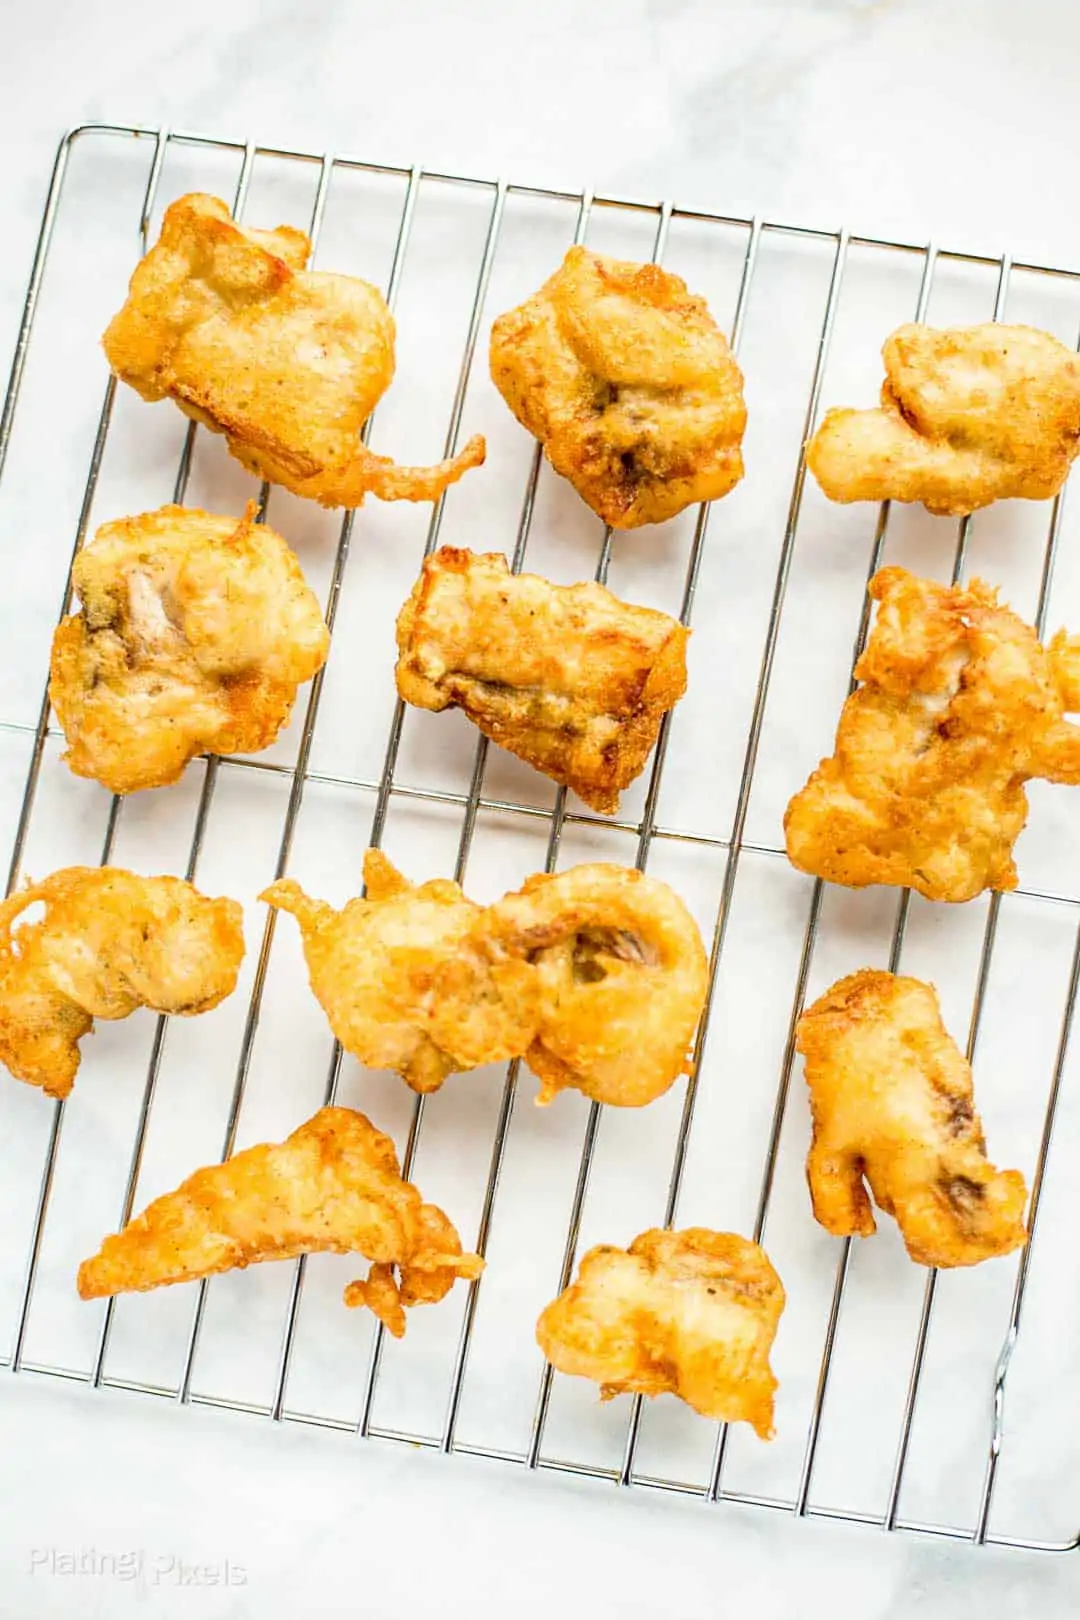 Golden Beer Battered Fried Fish pieces on a wire rack